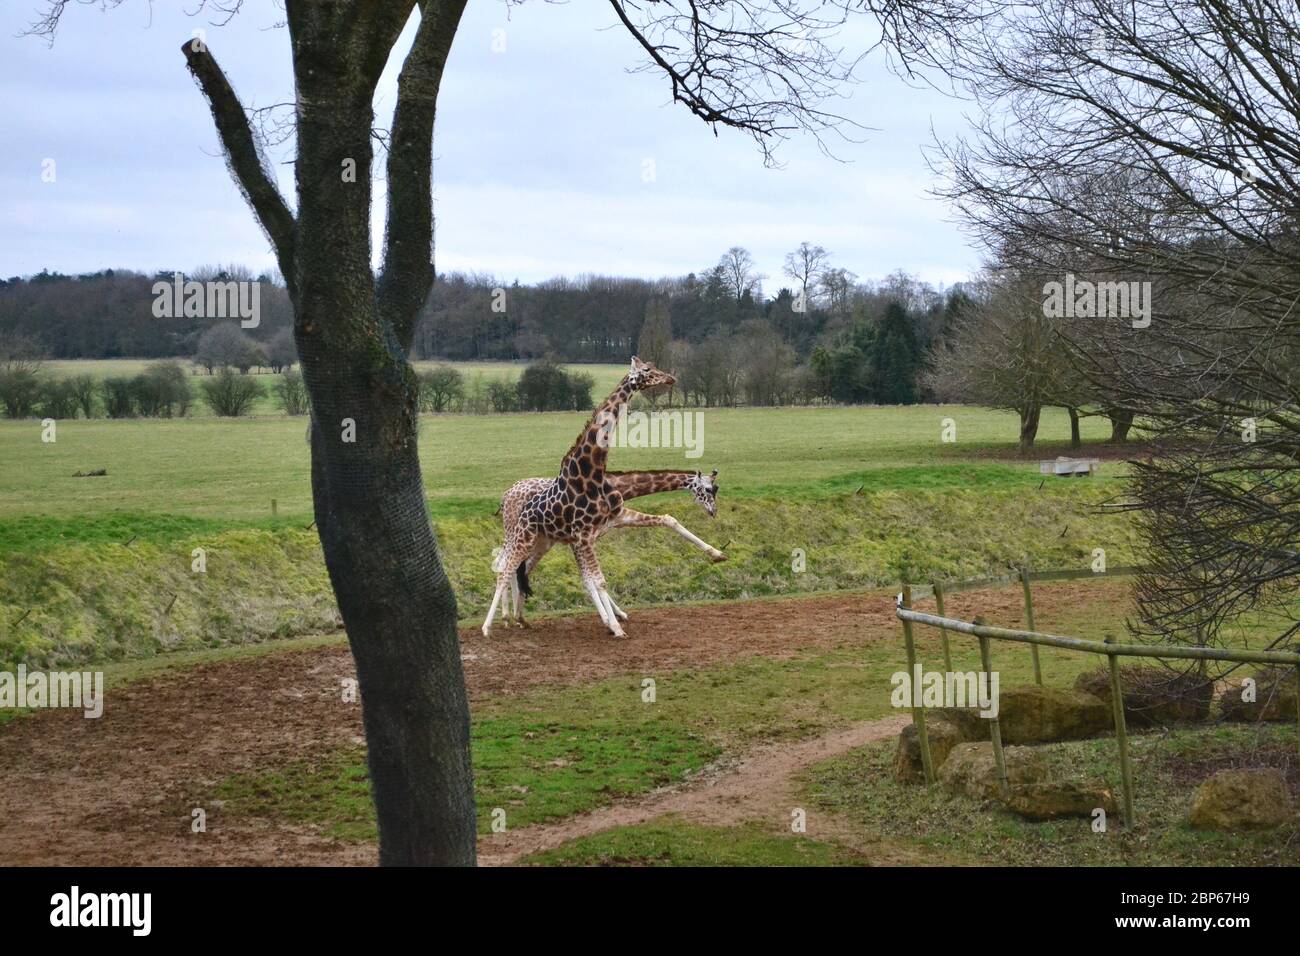 Two giraffes in a field, using their necks and legs to fight. Winter tree in foreground Stock Photo